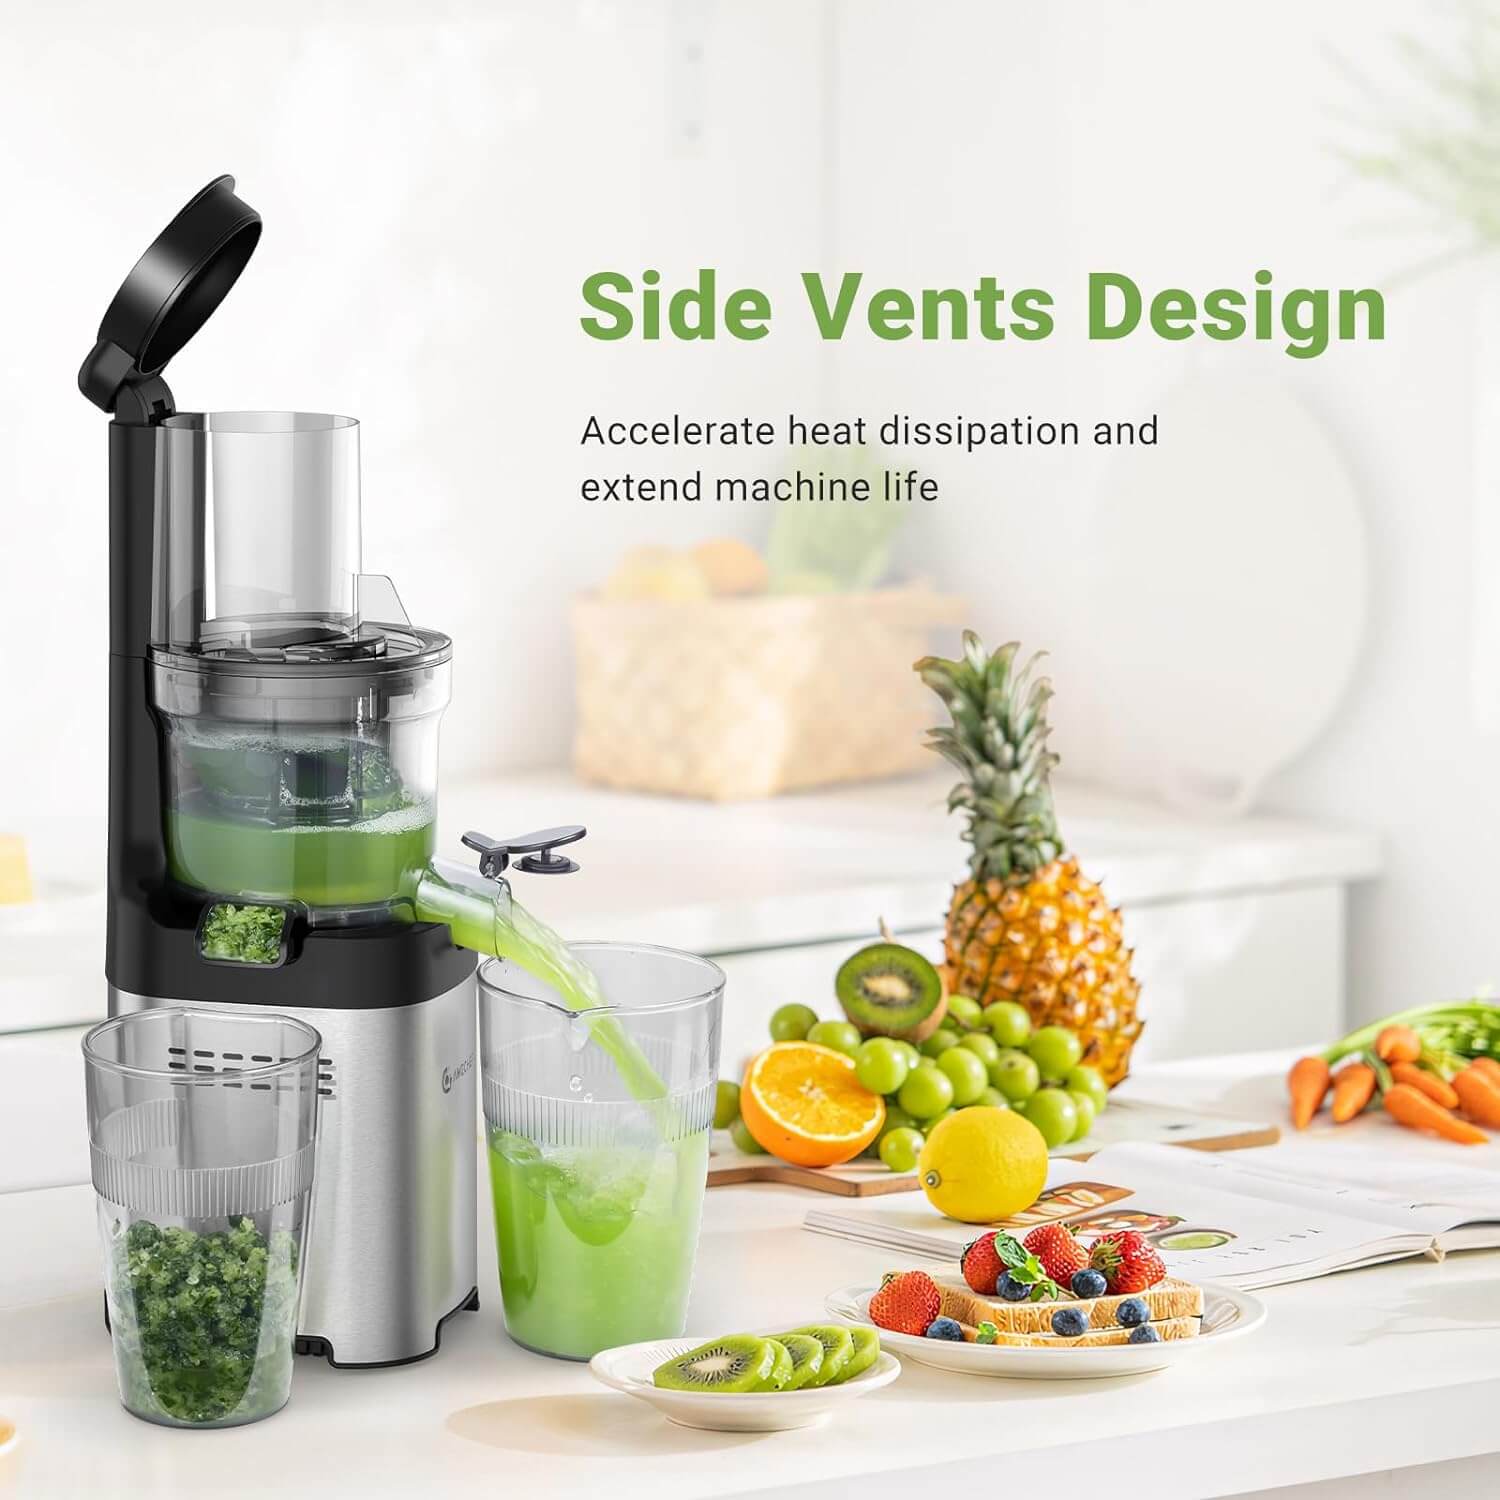 Amzchf Juicer Machine with Large Feed Chute for Whole Fruits